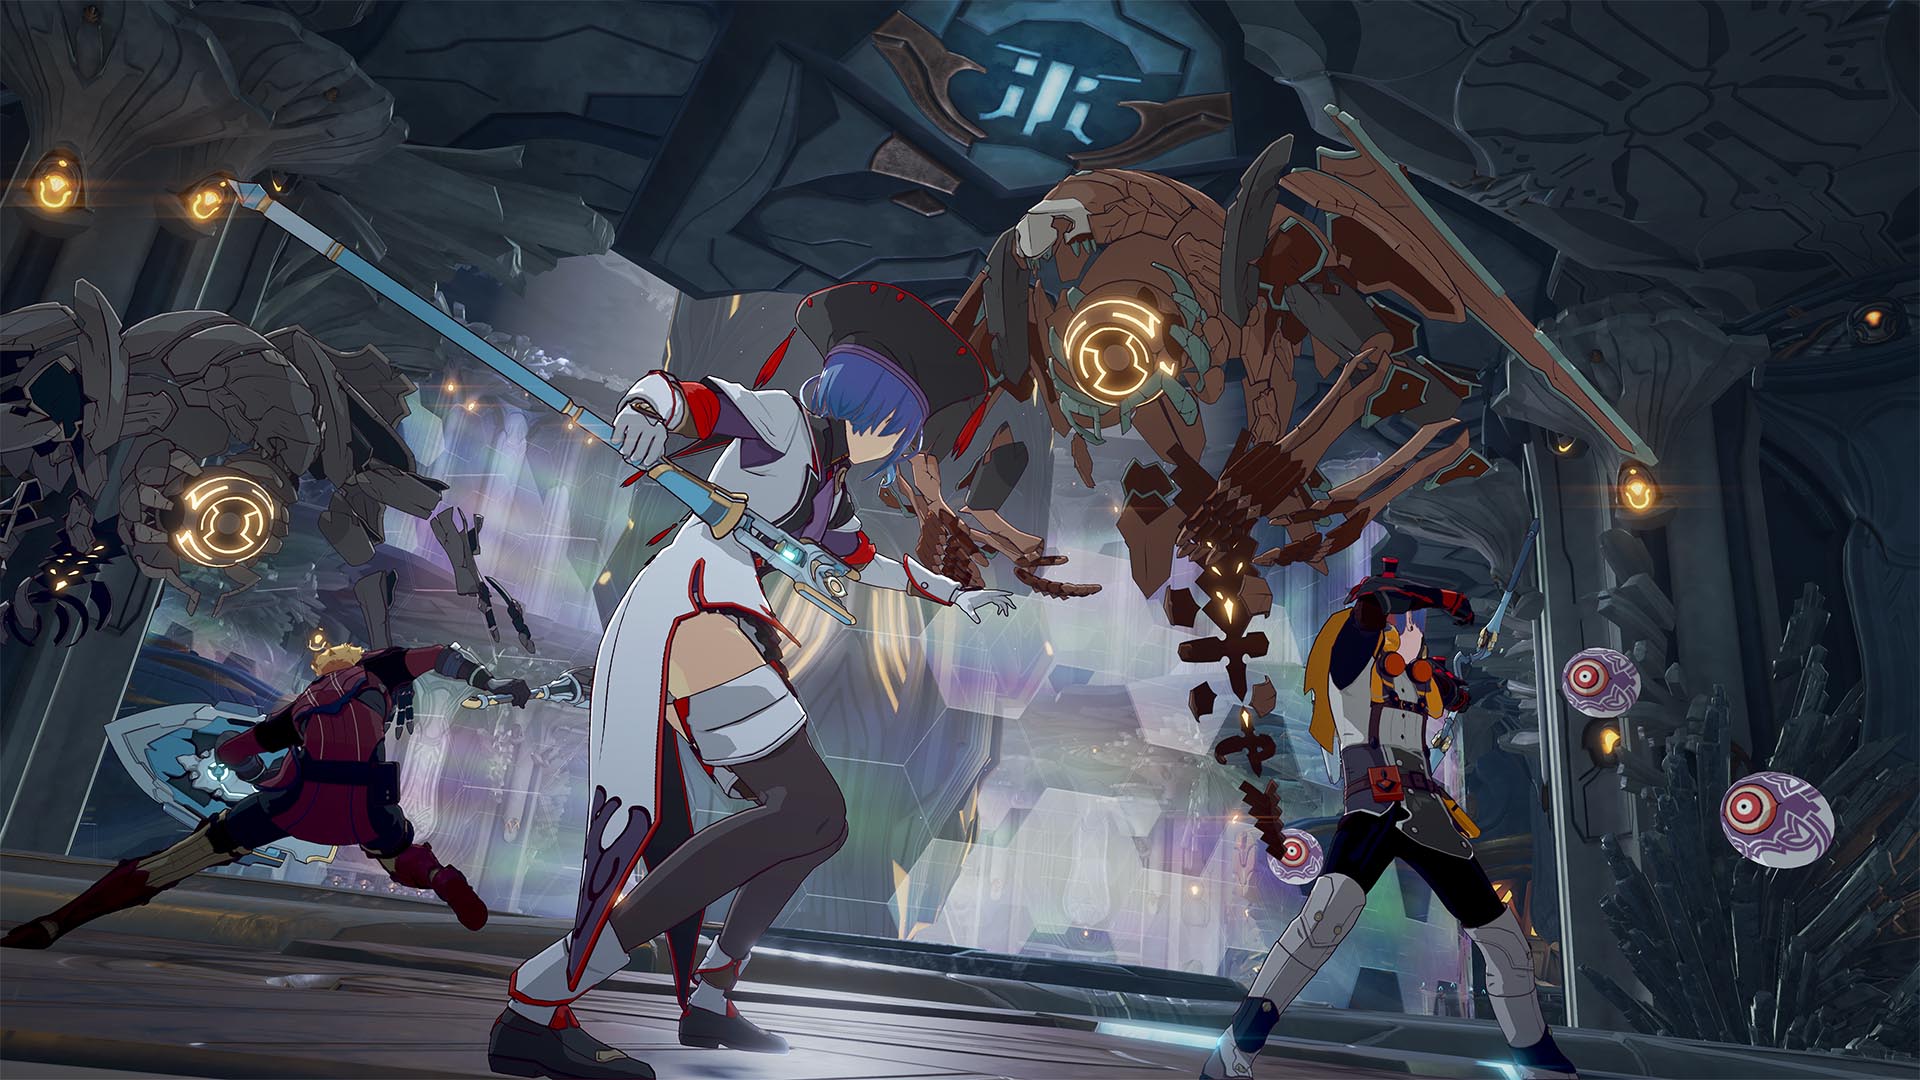 Blue Protocol has the makings of a strong anime MMO